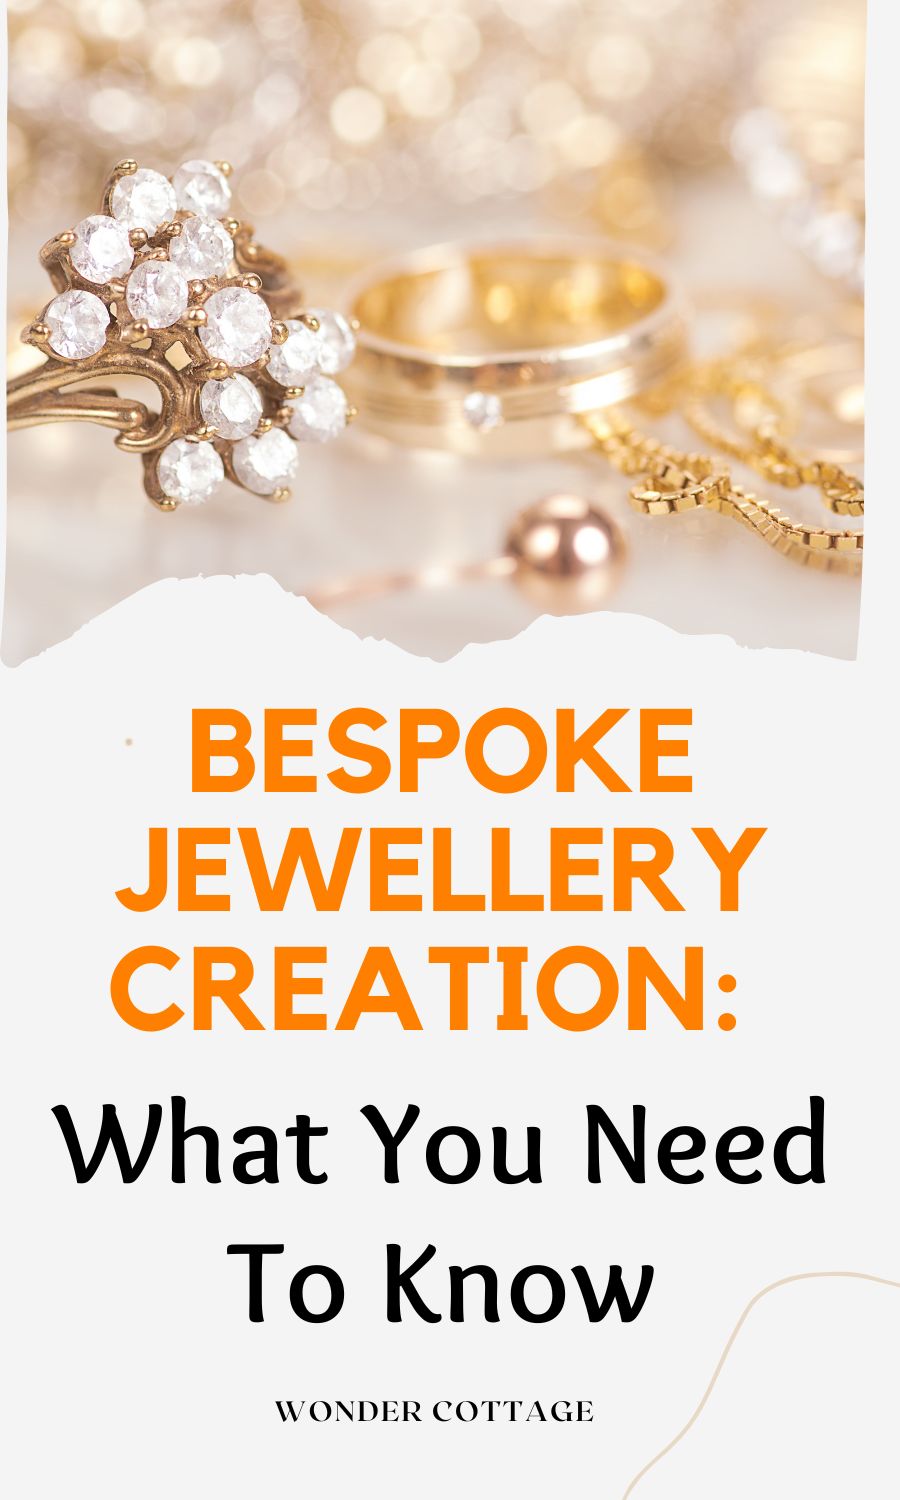 Bespoke Jewellery Creation: What You Need To Know